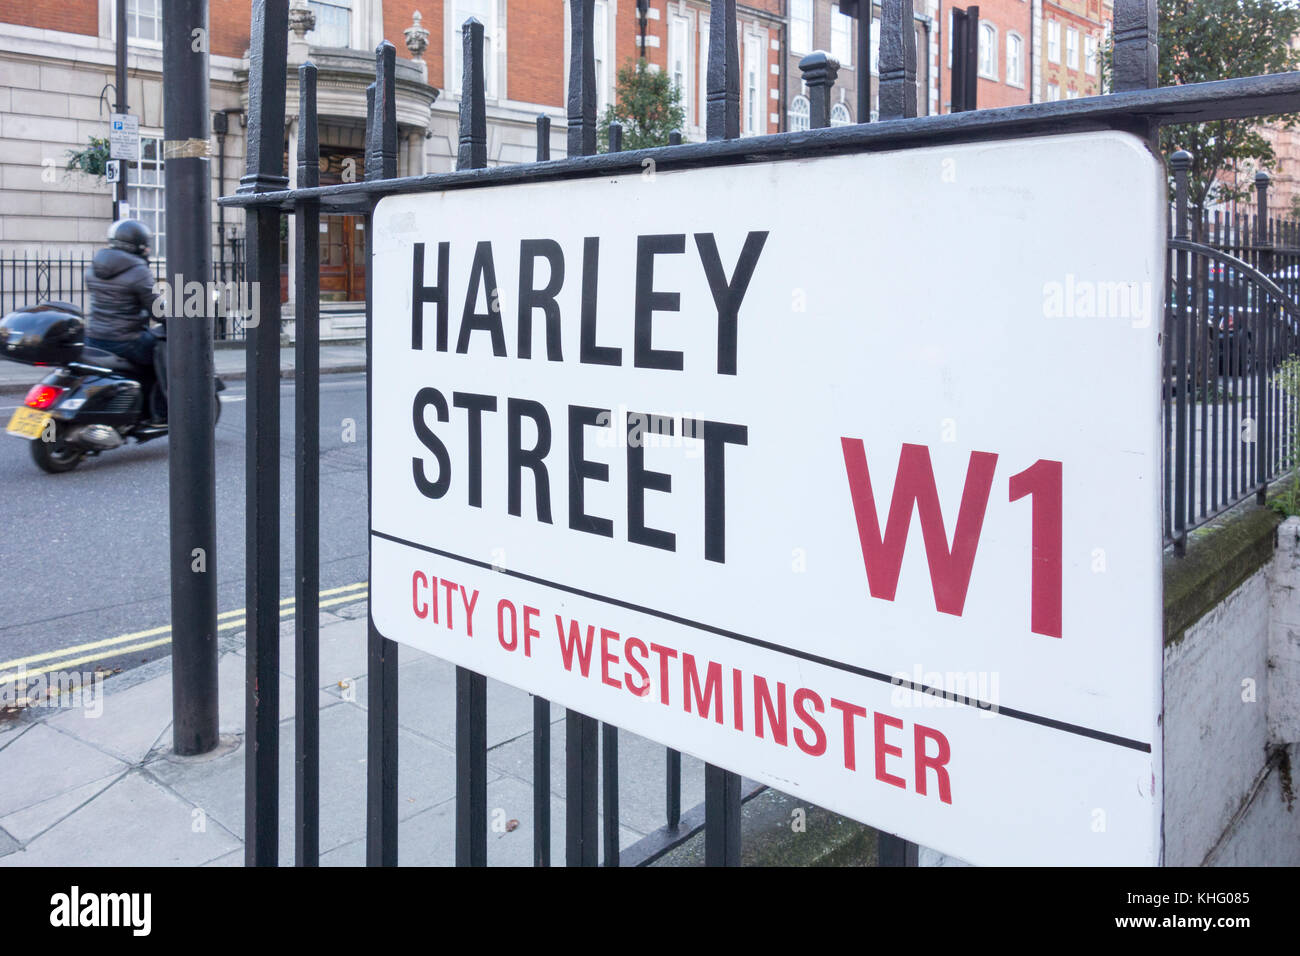 A man on a scooter passing Harley Street in the City of Westminster, London, UK Stock Photo